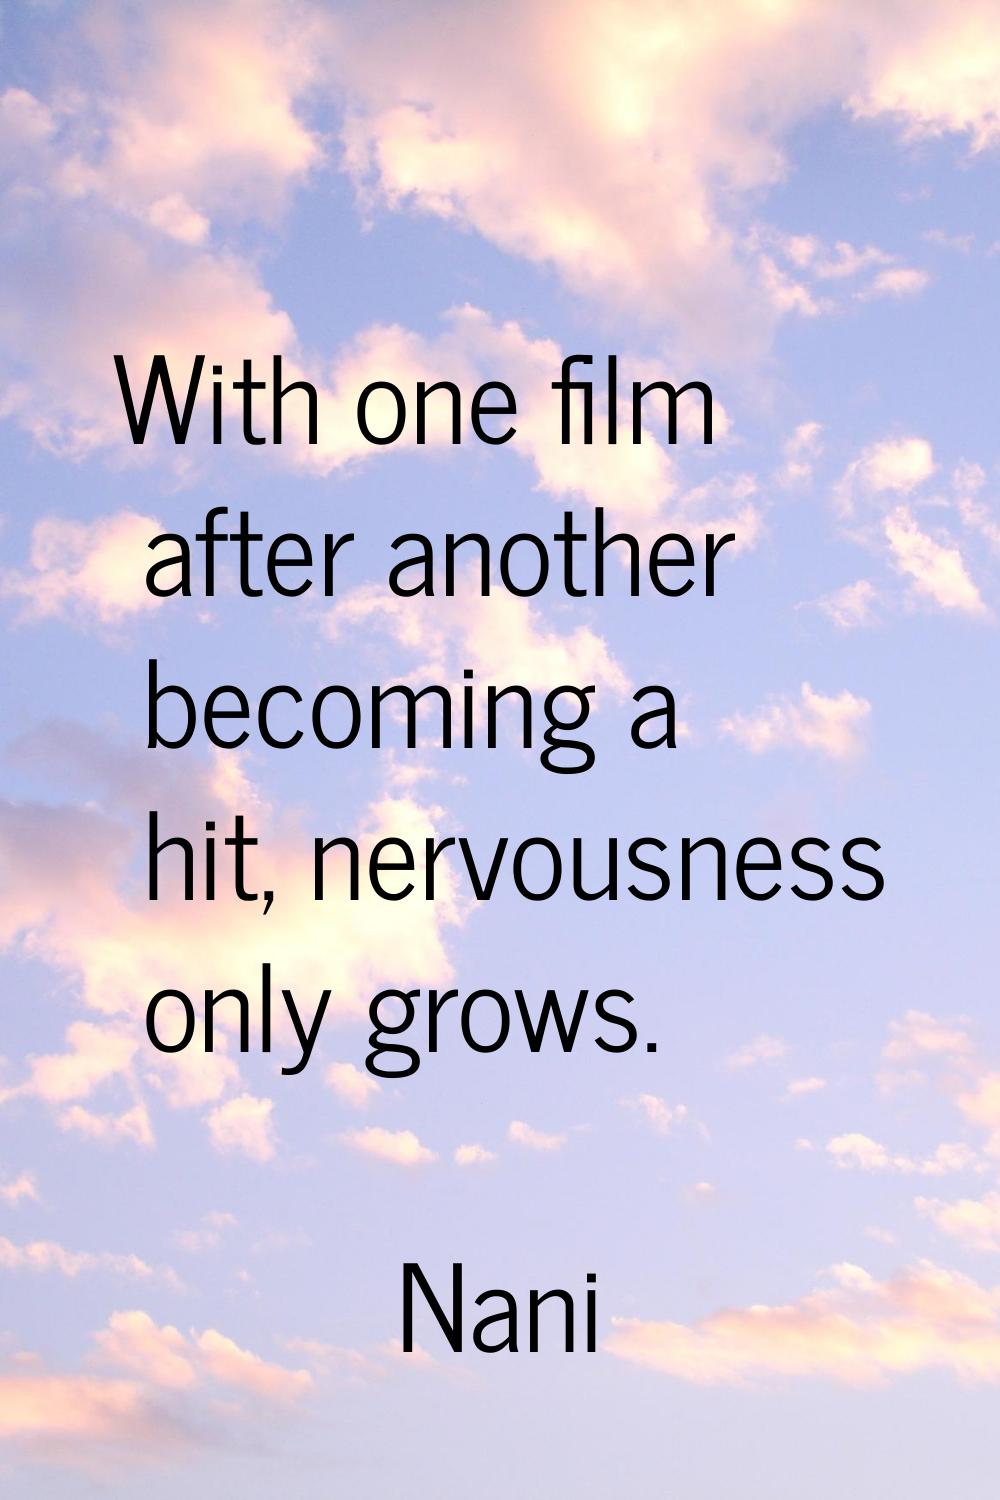 With one film after another becoming a hit, nervousness only grows.